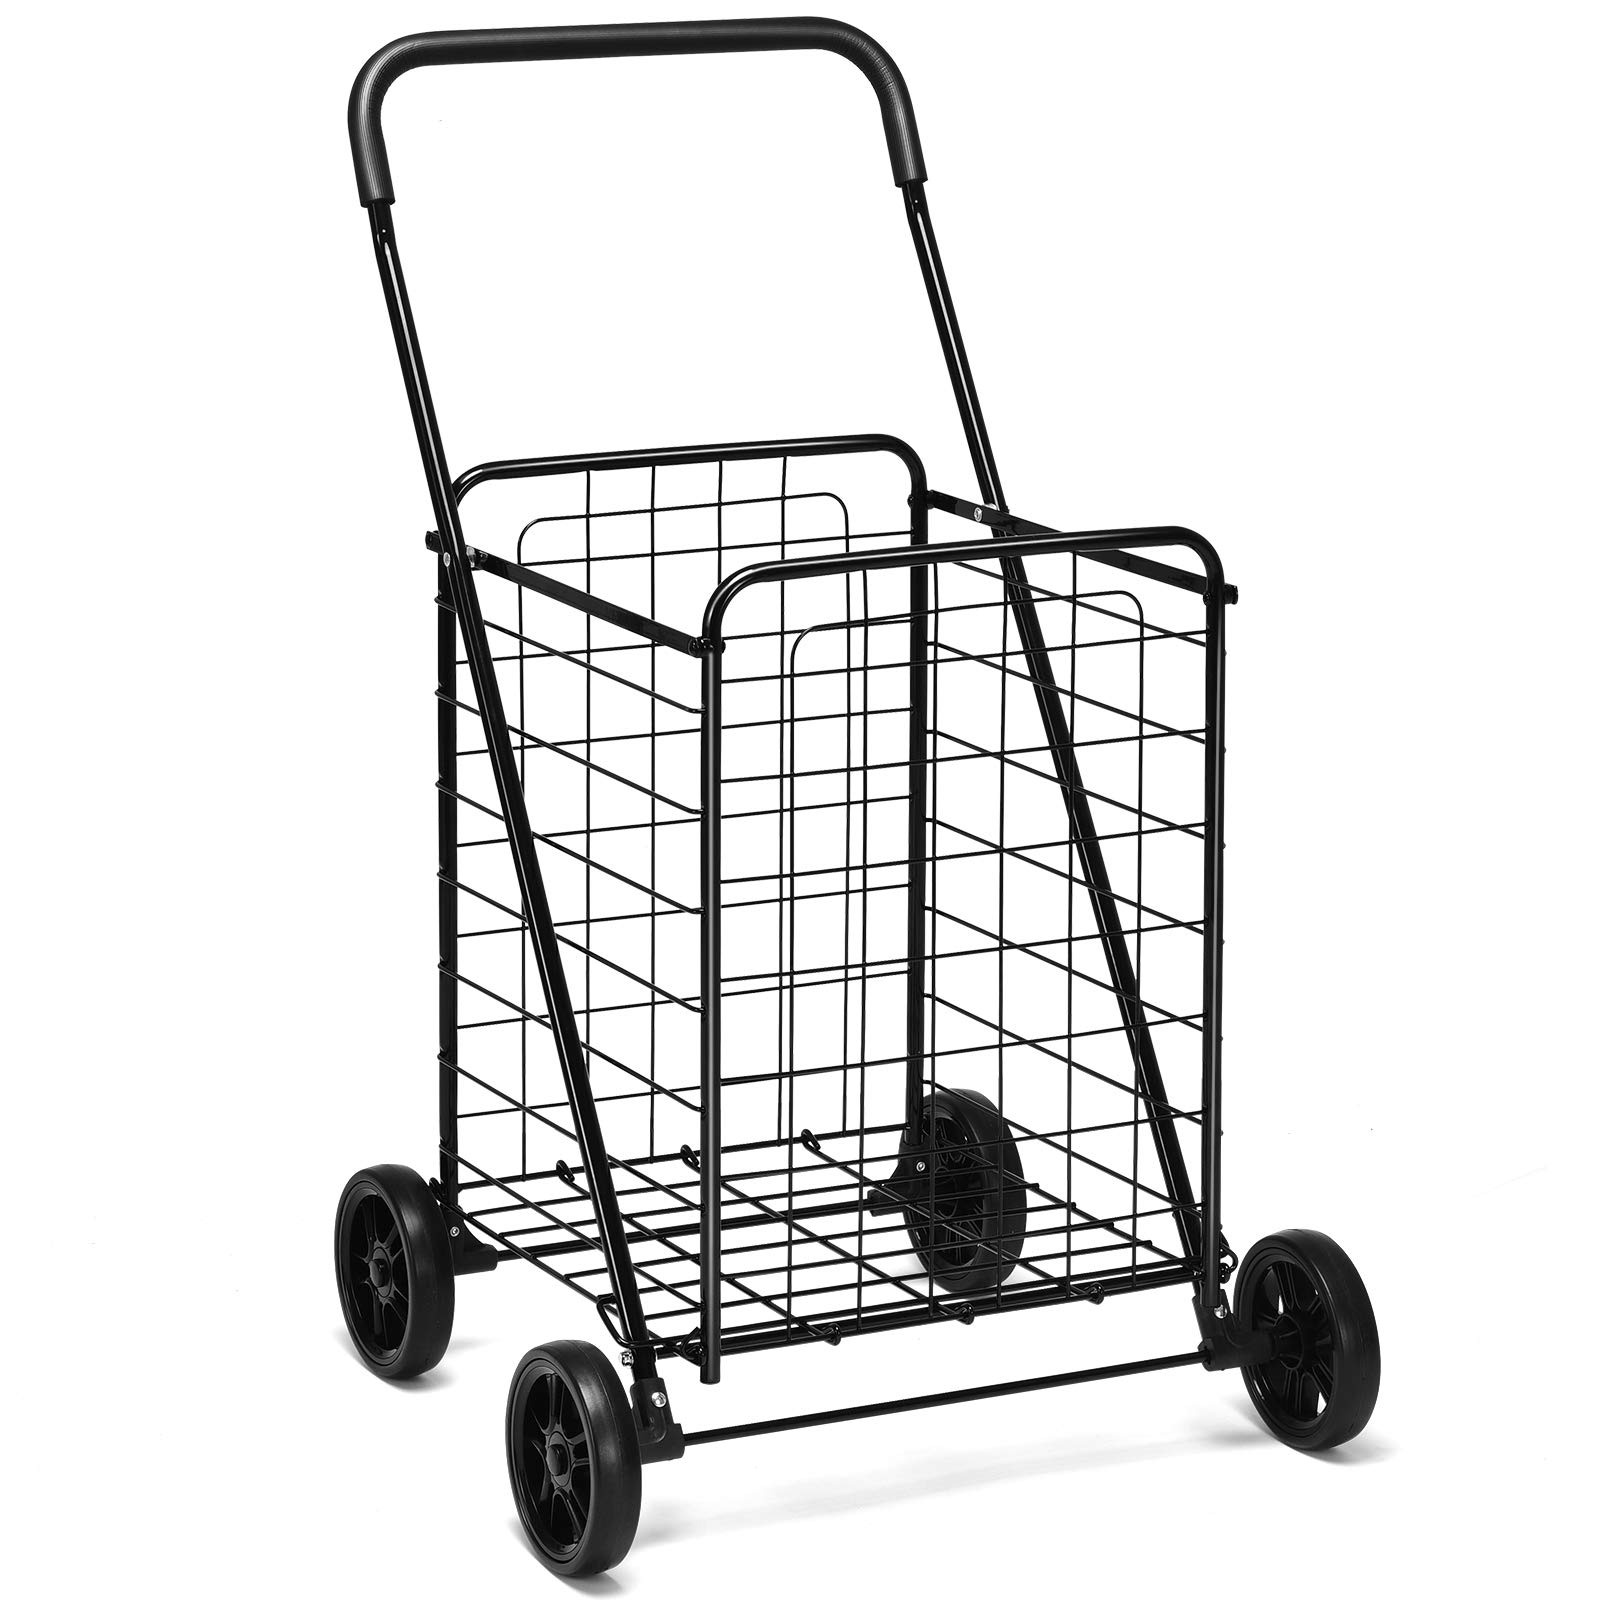 Goplus Folding Shopping Cart, Light Weight Utility Grocery Cart with Wheels, Portable Cart